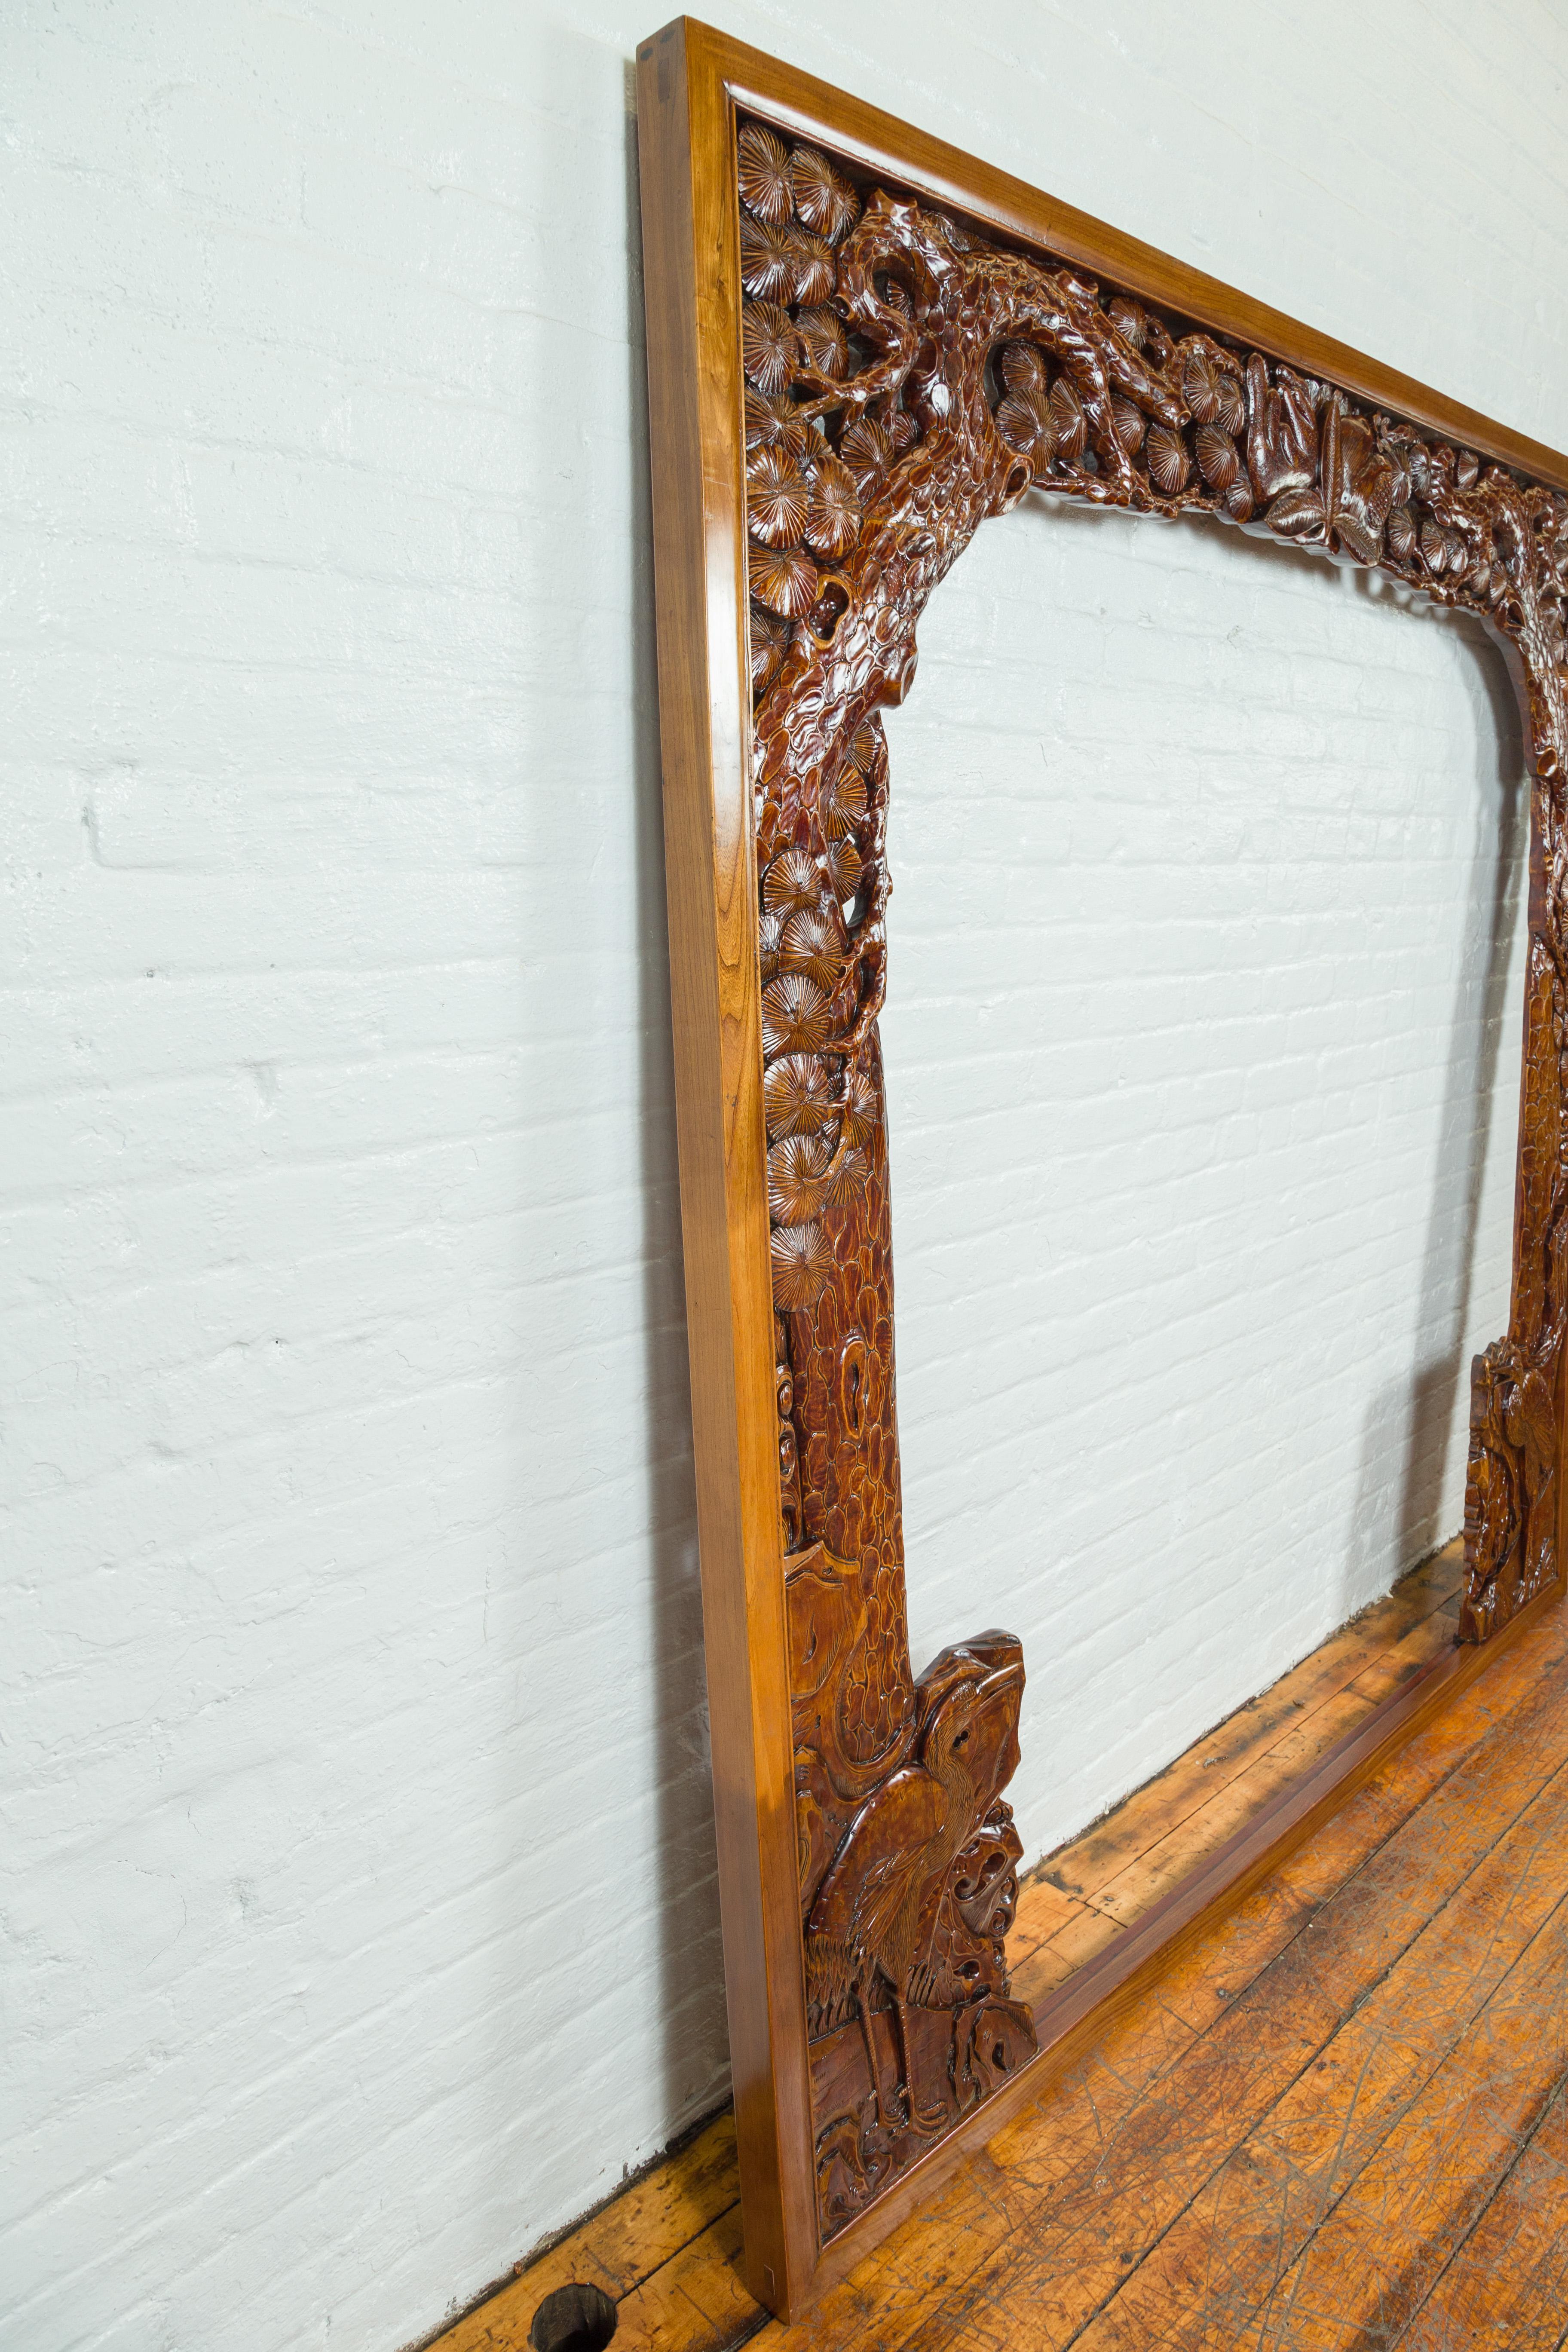 Oversized 19th Century Carved Wooden Frame with Birds, Foliage and Tree Limbs For Sale 4